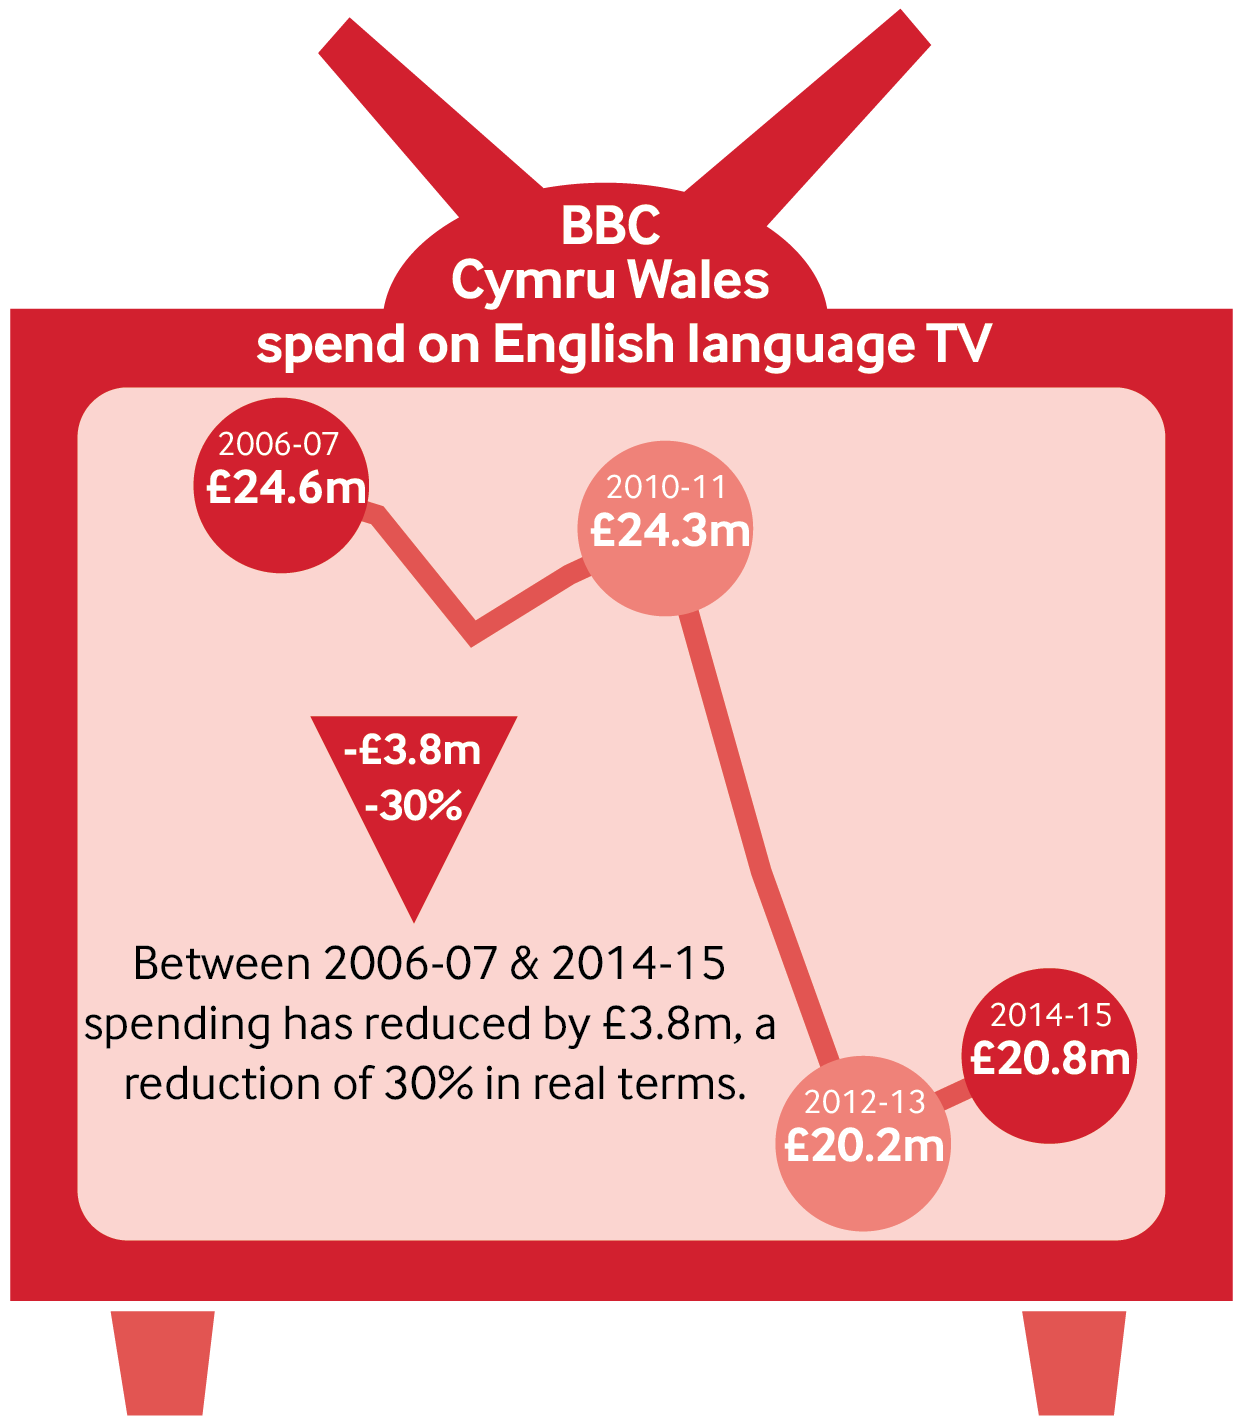 A graph showing BBC Cymru Wales spend on English language television declining from £24.6 million in 2006-7 to £20.8 million in 2014-15.